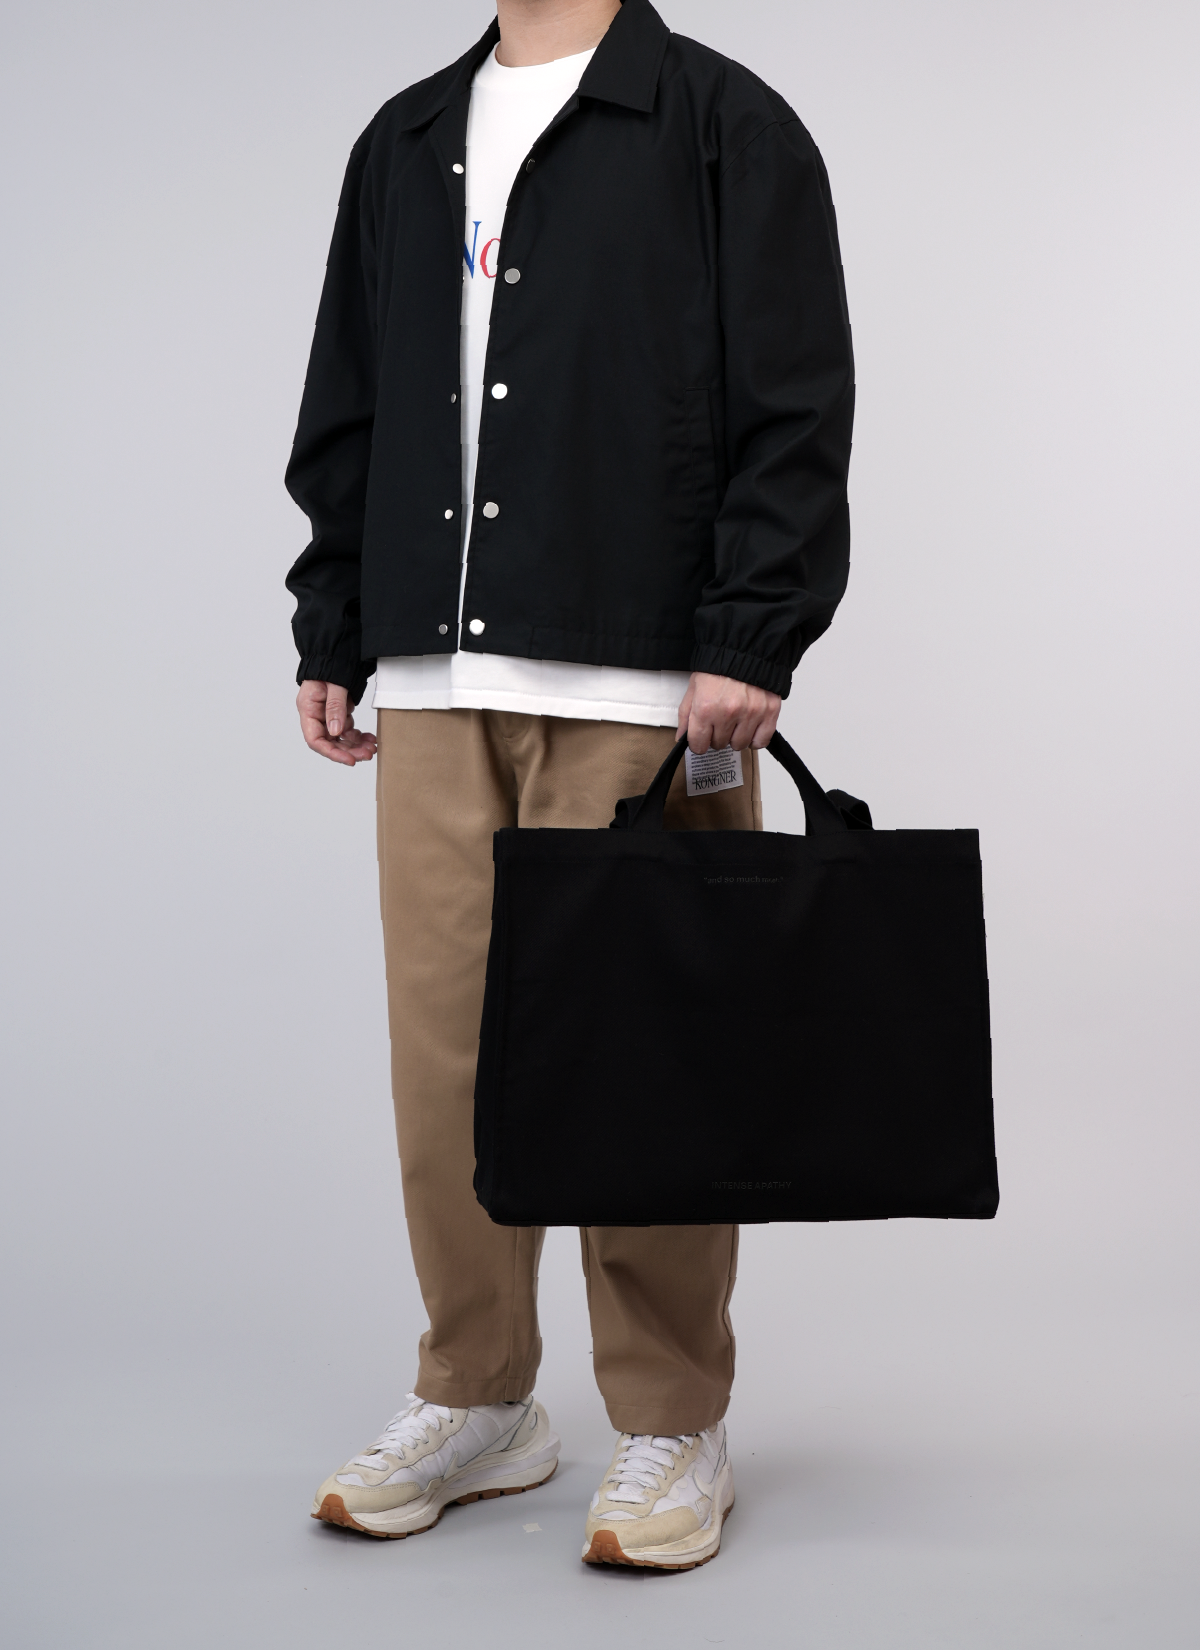 ˝SO MUCH MORE˝  Shopping Bag Black